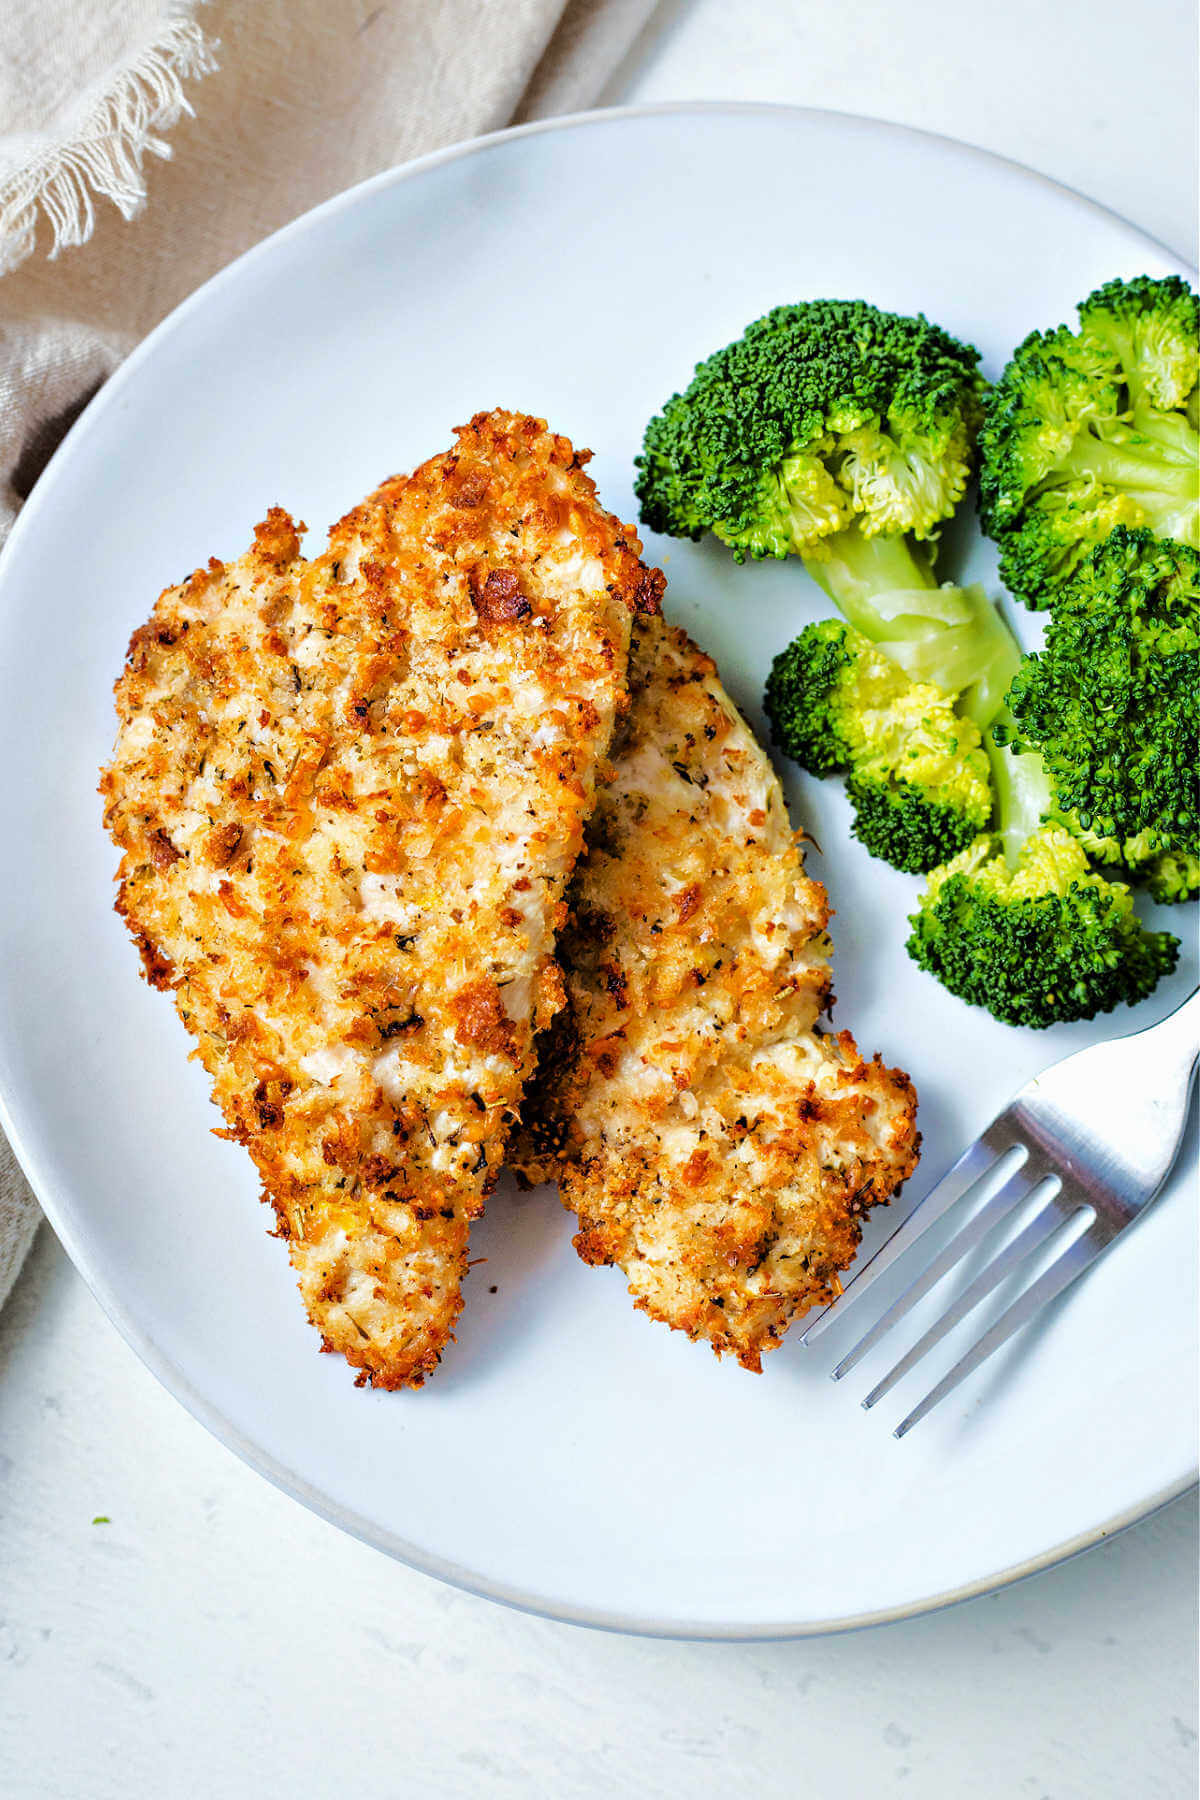 two air fryer chicken cutlets on a white plate with a side of broccoli.